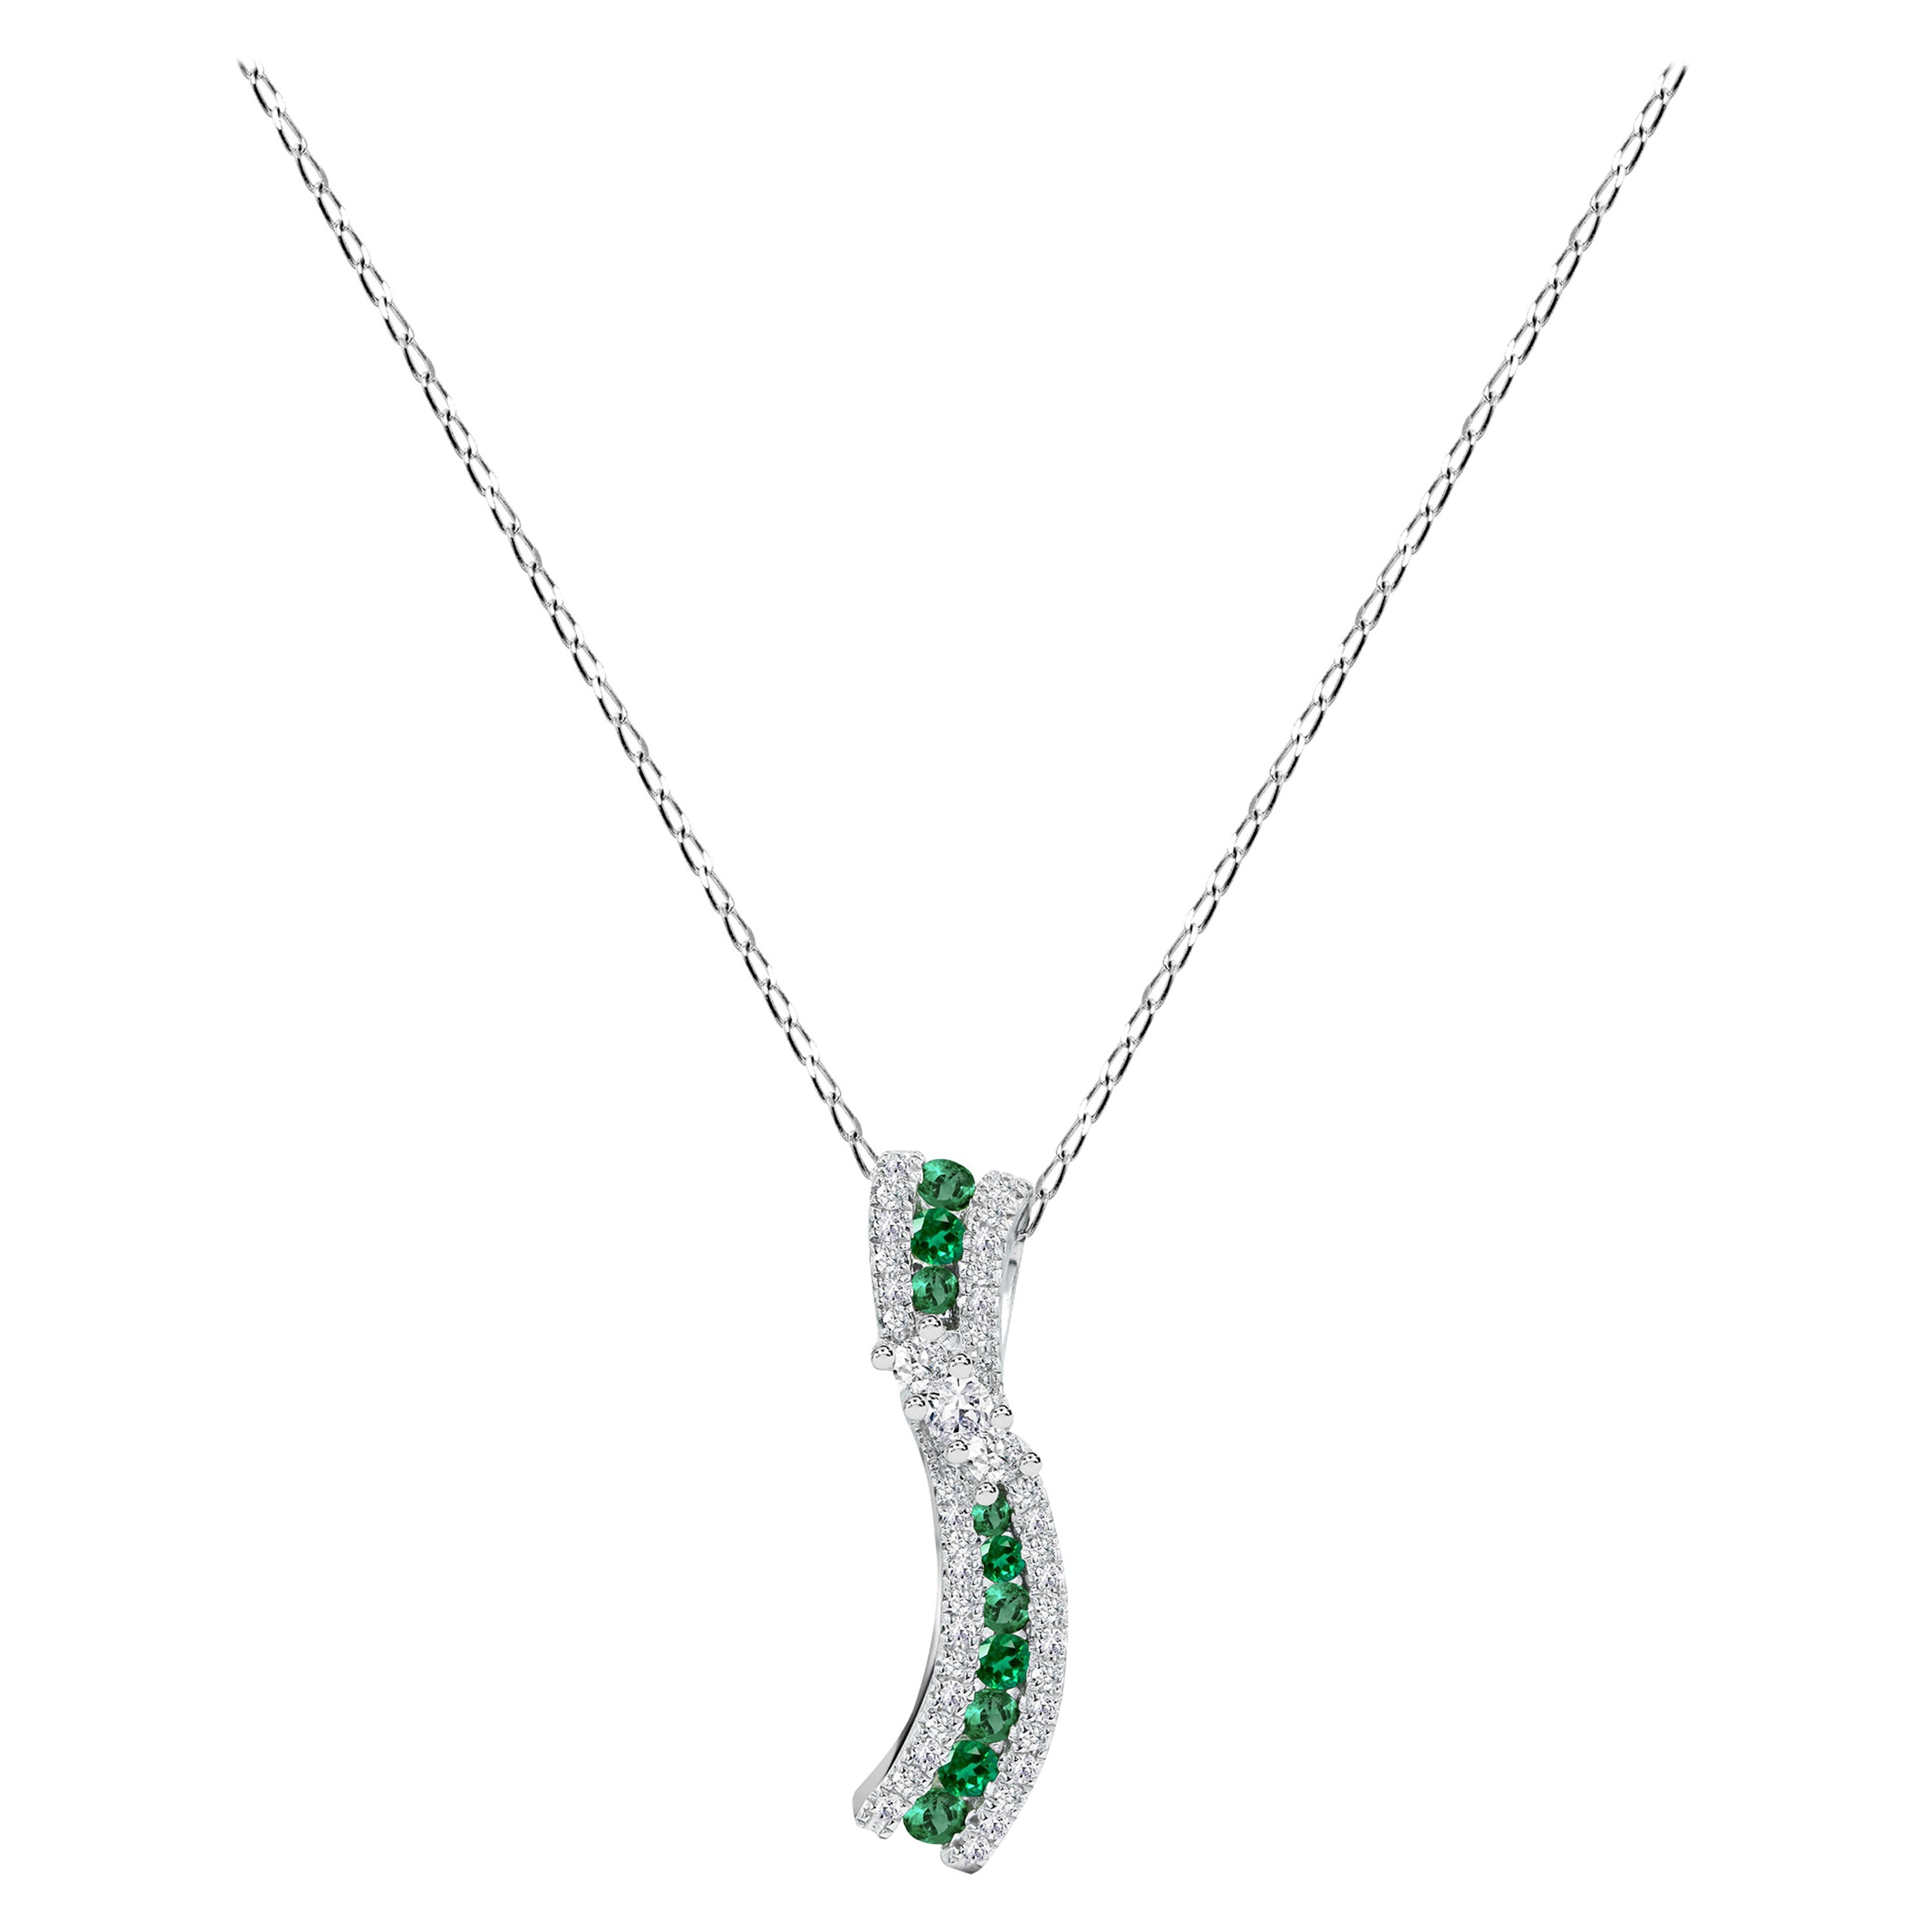 1.15 Ct Diamond and Emerald Necklace in 14k Gold